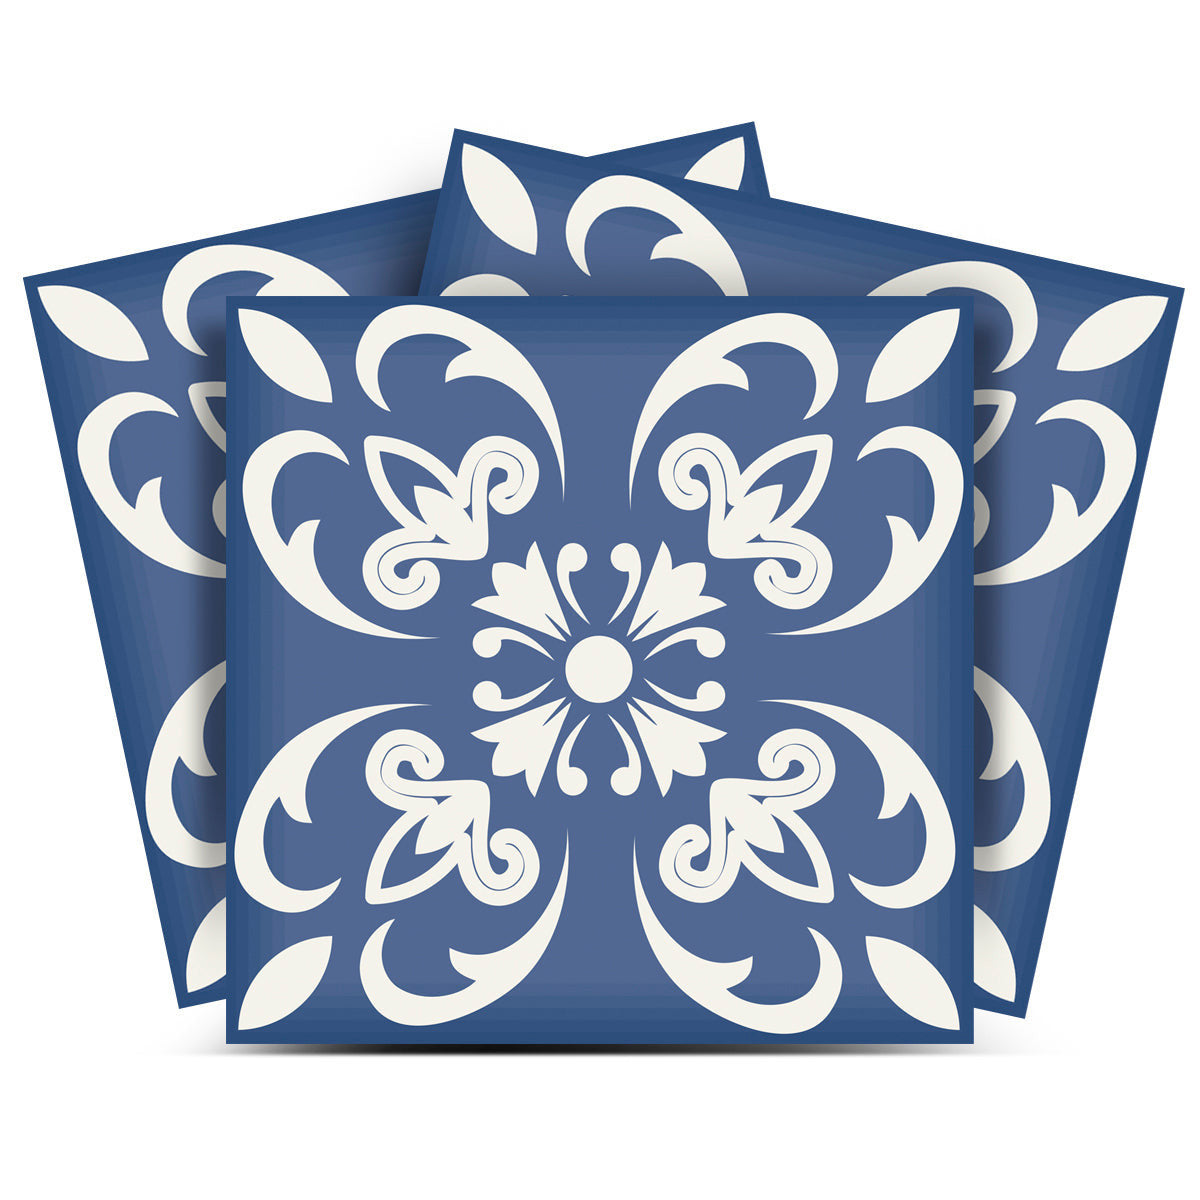 4" X 4" Wedgwood Blue And White Peel And Stick Removable Tiles